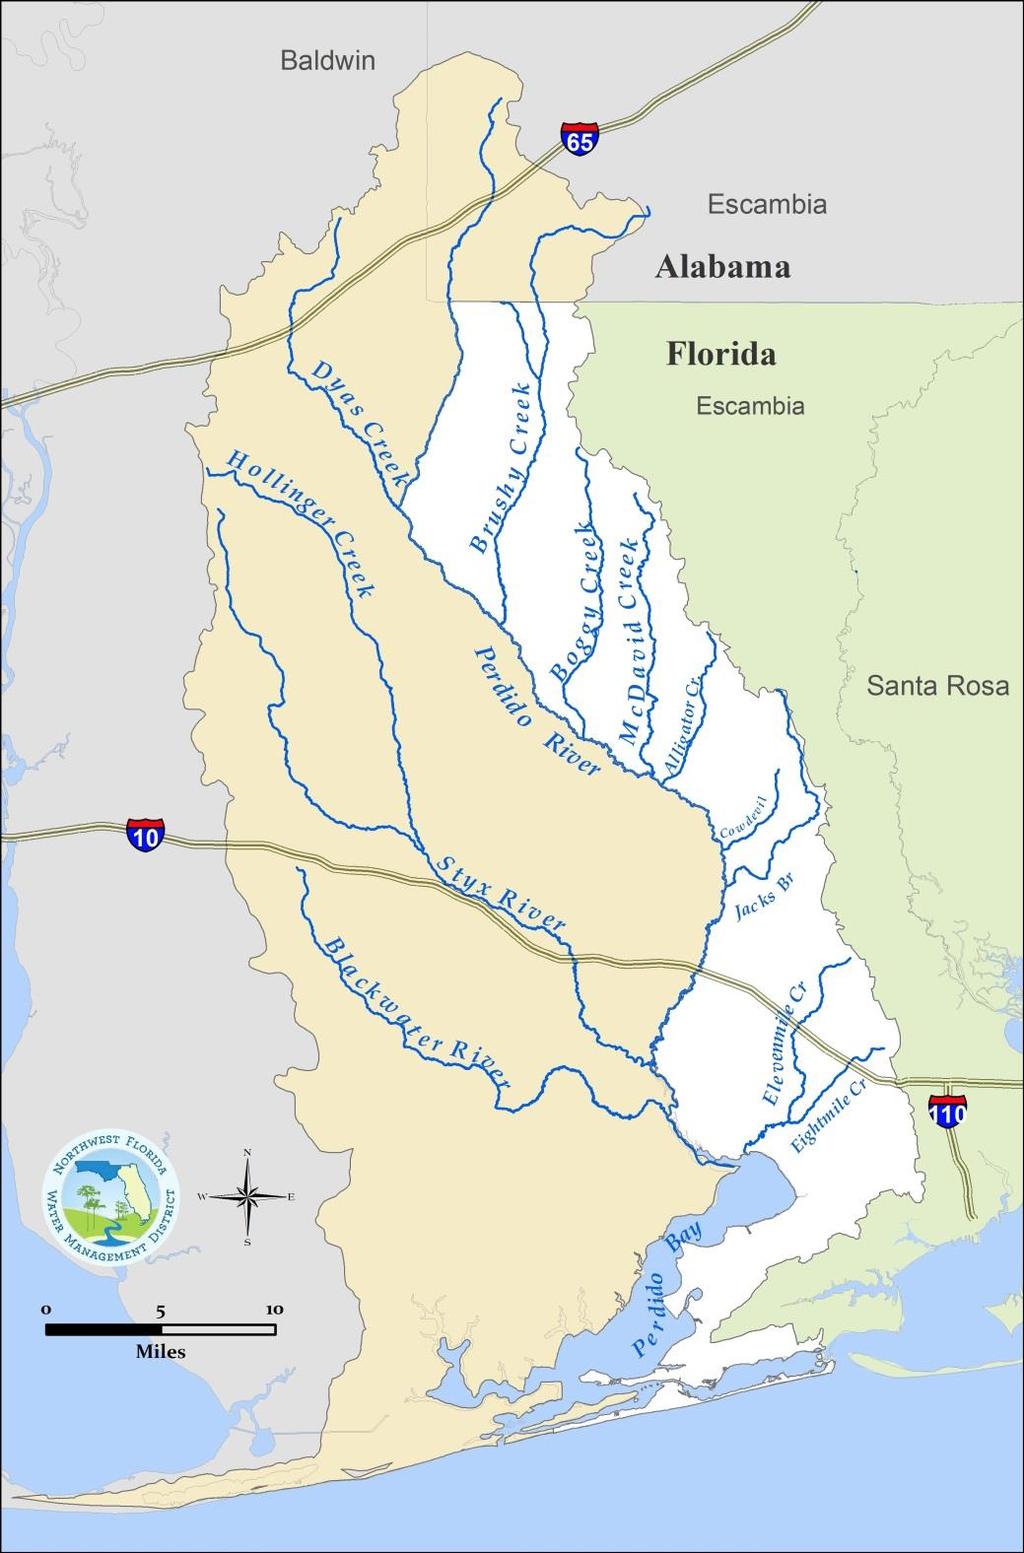 Perdido River and Bay Watershed 1,165 square miles 70% in Alabama; 30% in Escambia County, Florida Perdido River serves as the state line Perdido River annual average discharge to Perdido Bay 783